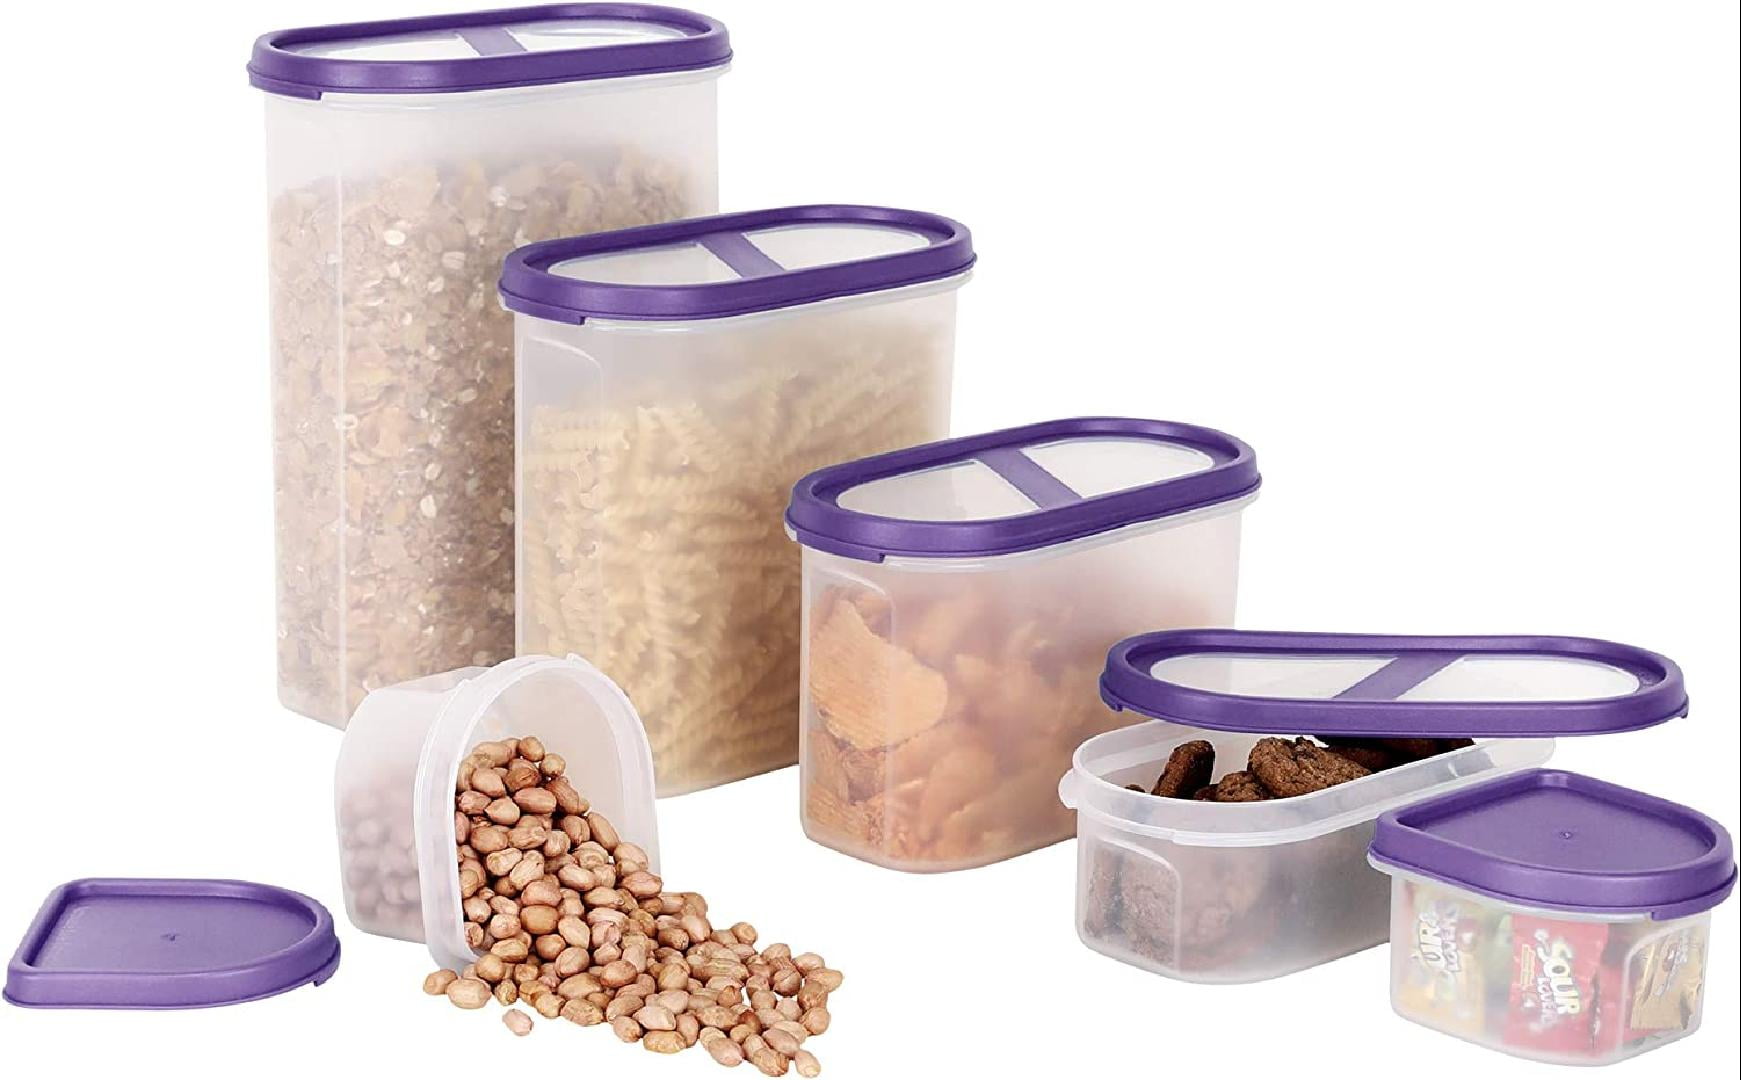 Skroam 6PCS Cereal Containers Storage, Airtight Food Storage with Lid for  Kitchen & Pantry Organization, BPA-Free Plastic Canister, 20 Lables & Marker